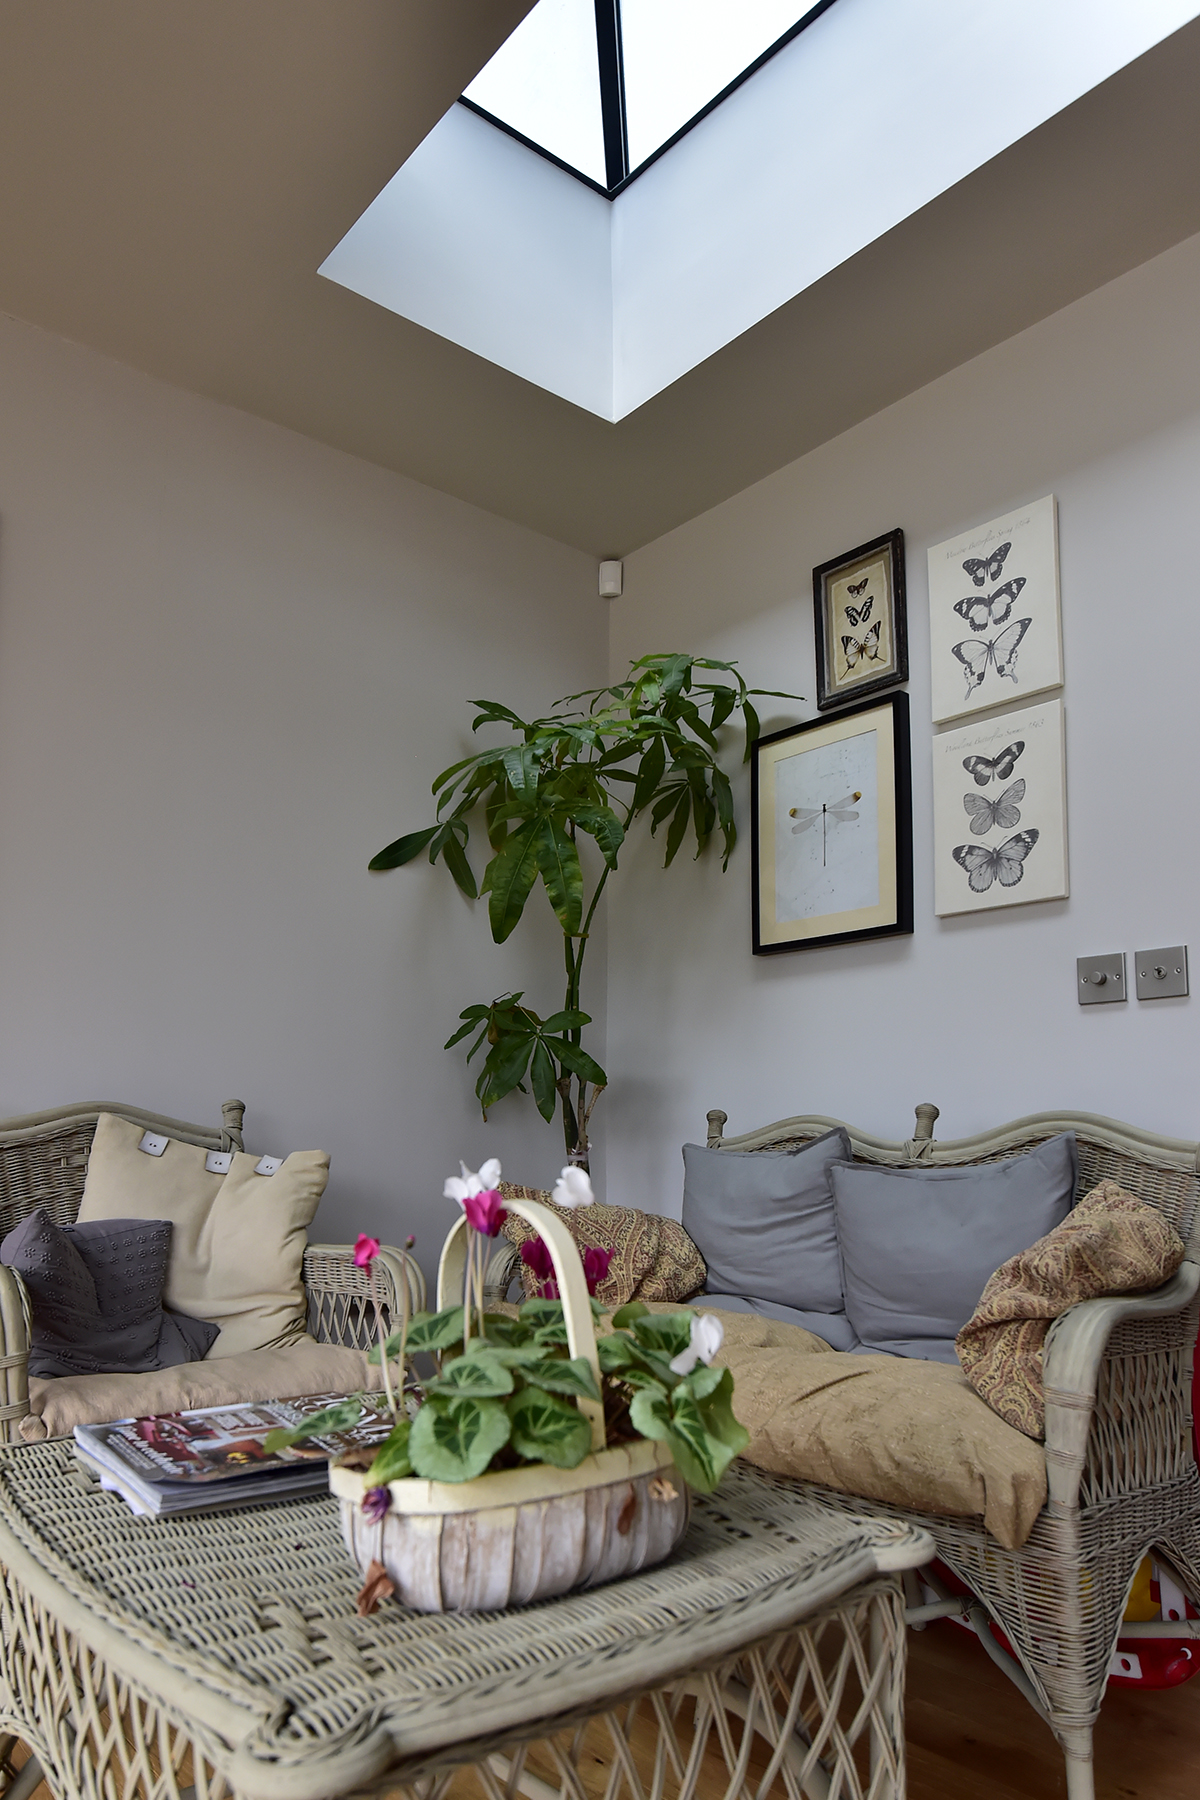 Sun Room with Roof Light Window. Interior Design by Sarah Maidment Interiors,Brighton, Hove and East Sussex